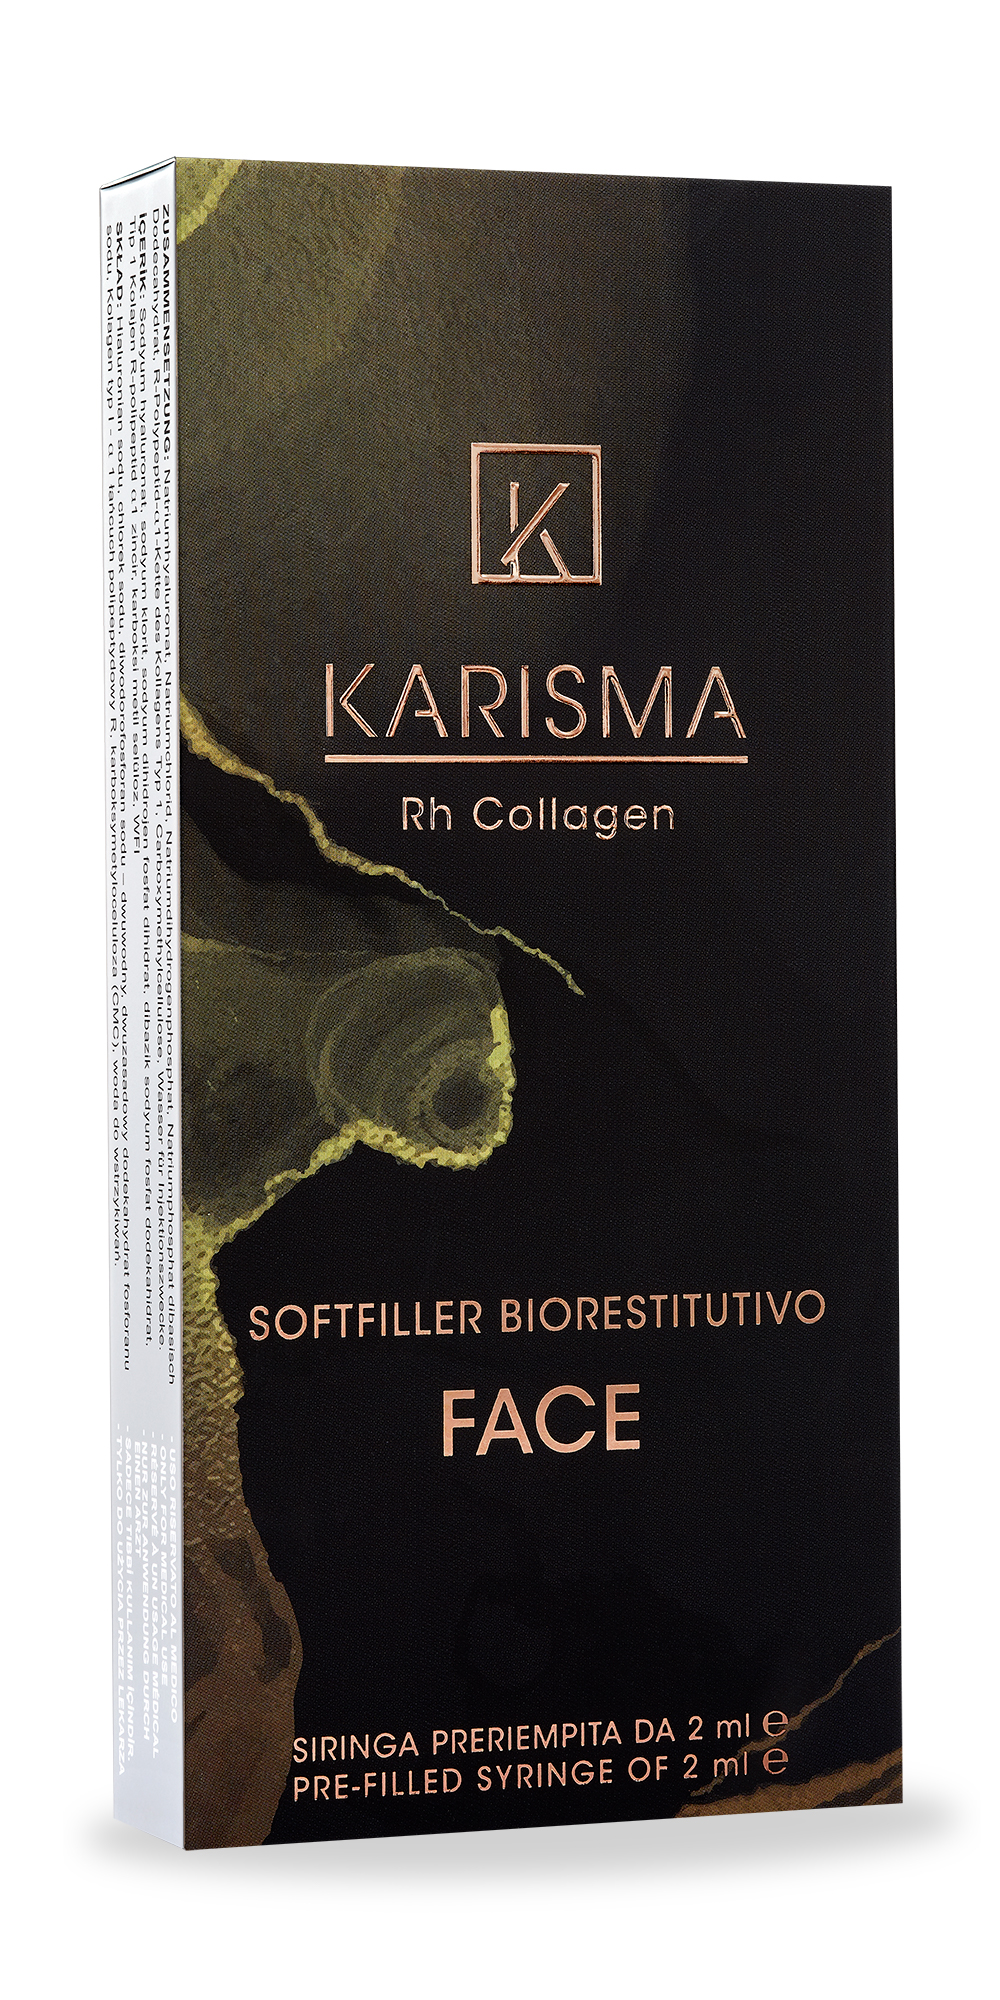 Karisma Collagen – The Future Of Injectable Collagen